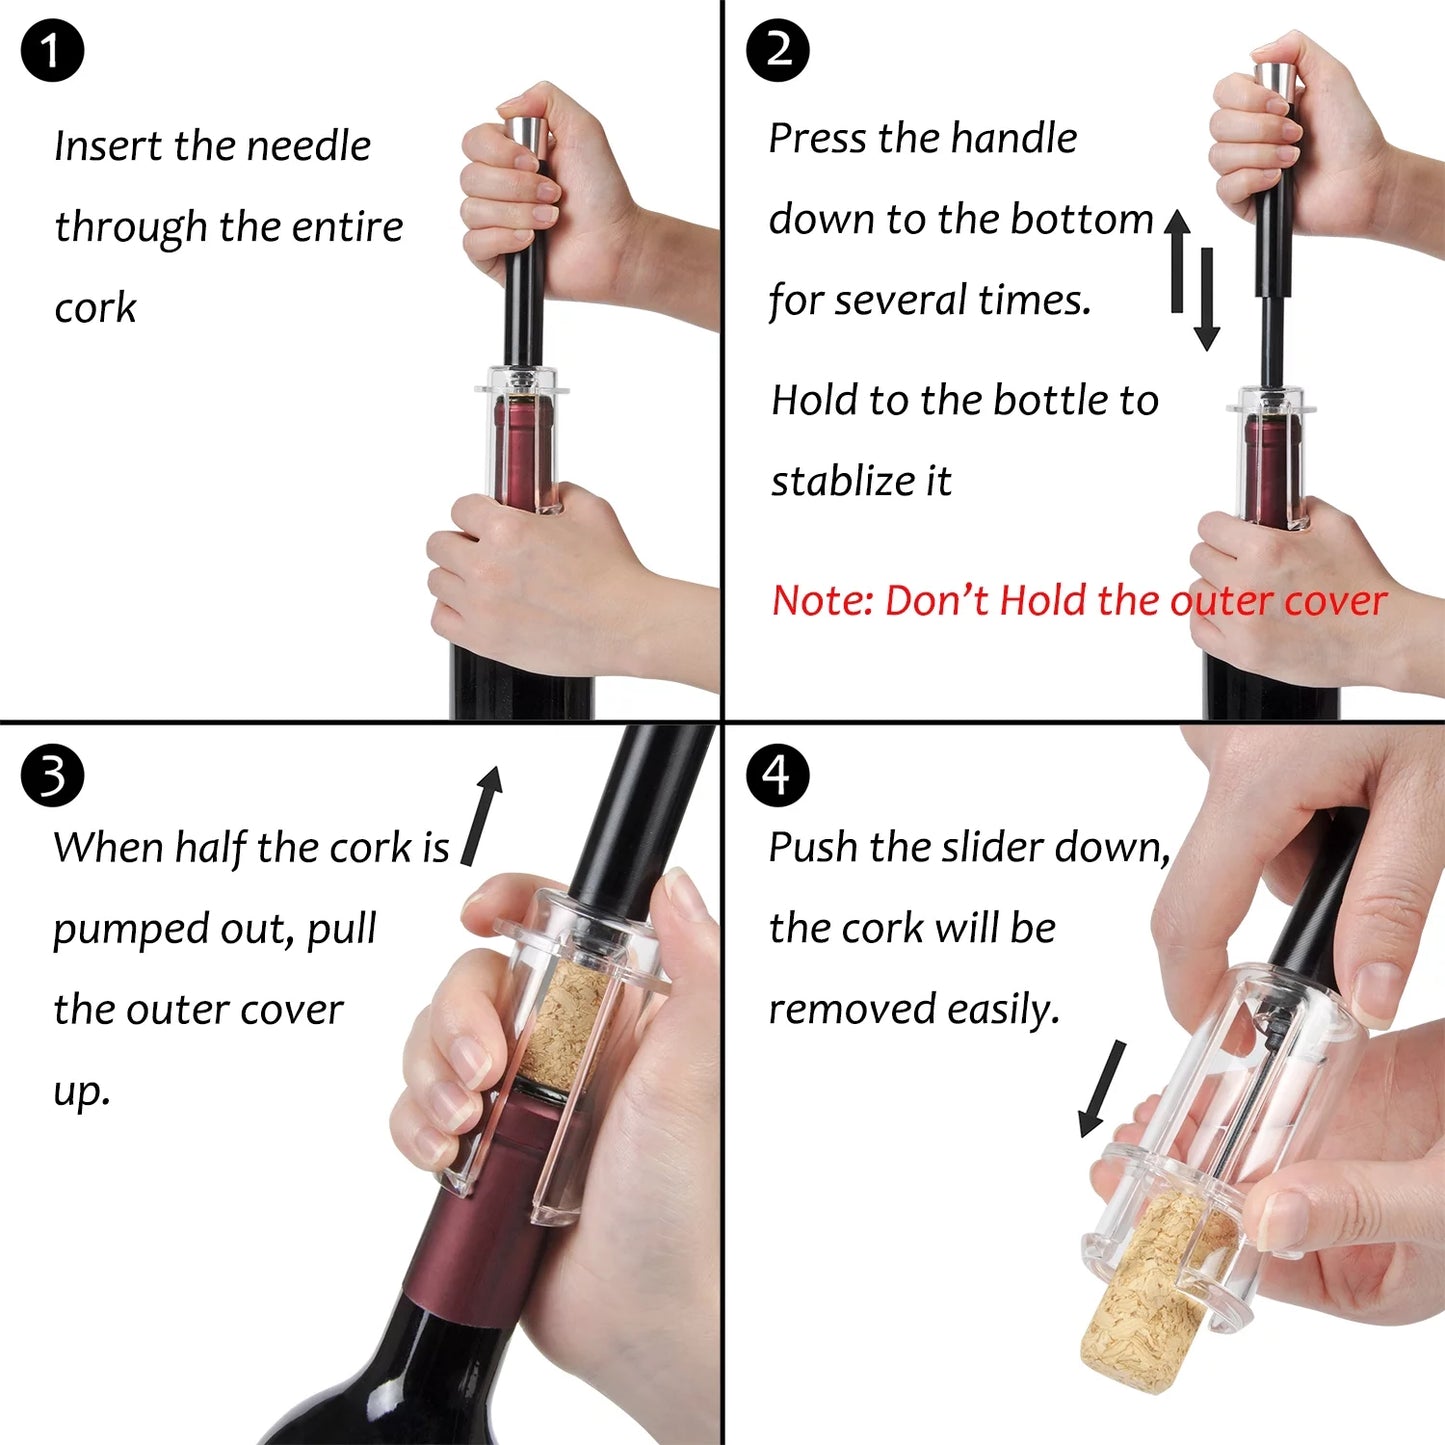 2 Perfect Wine Opener Gift Sets- Buy One Get One Free 59.95